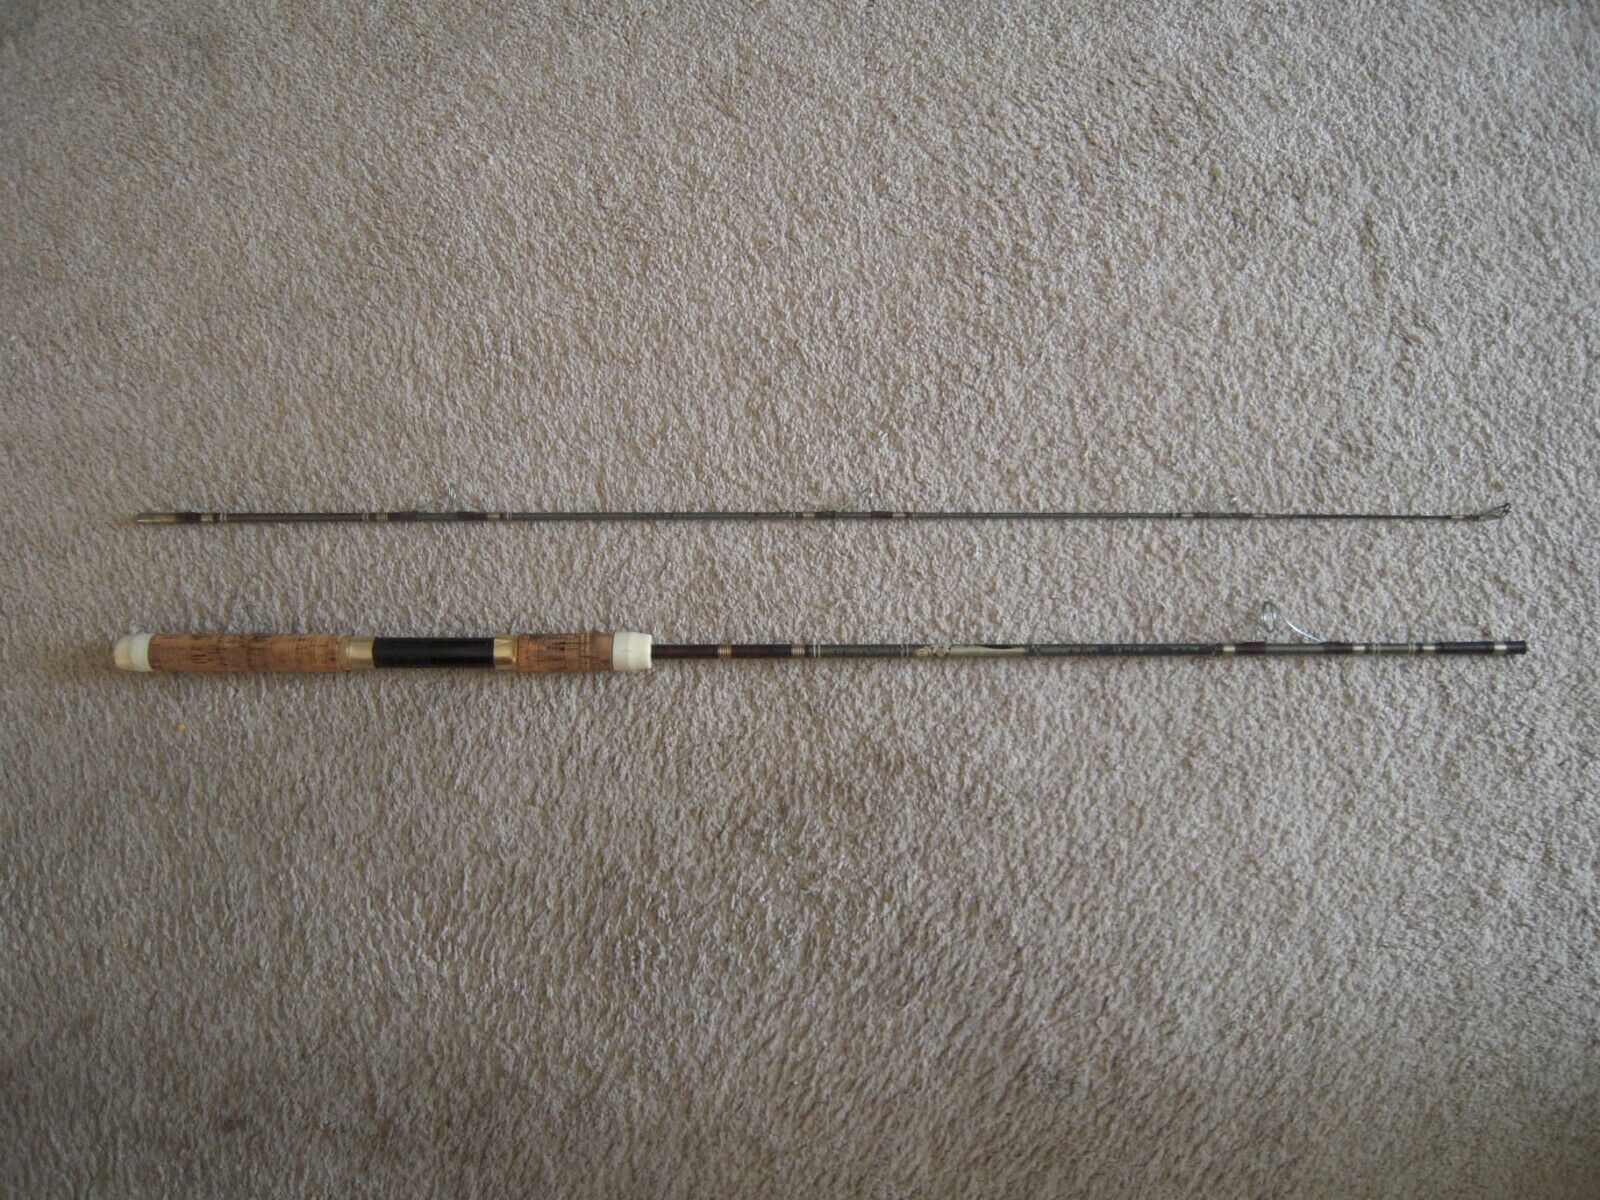 Roddy 2 Piece 6' 6" Spinning Fishing Rod With Cork Handle